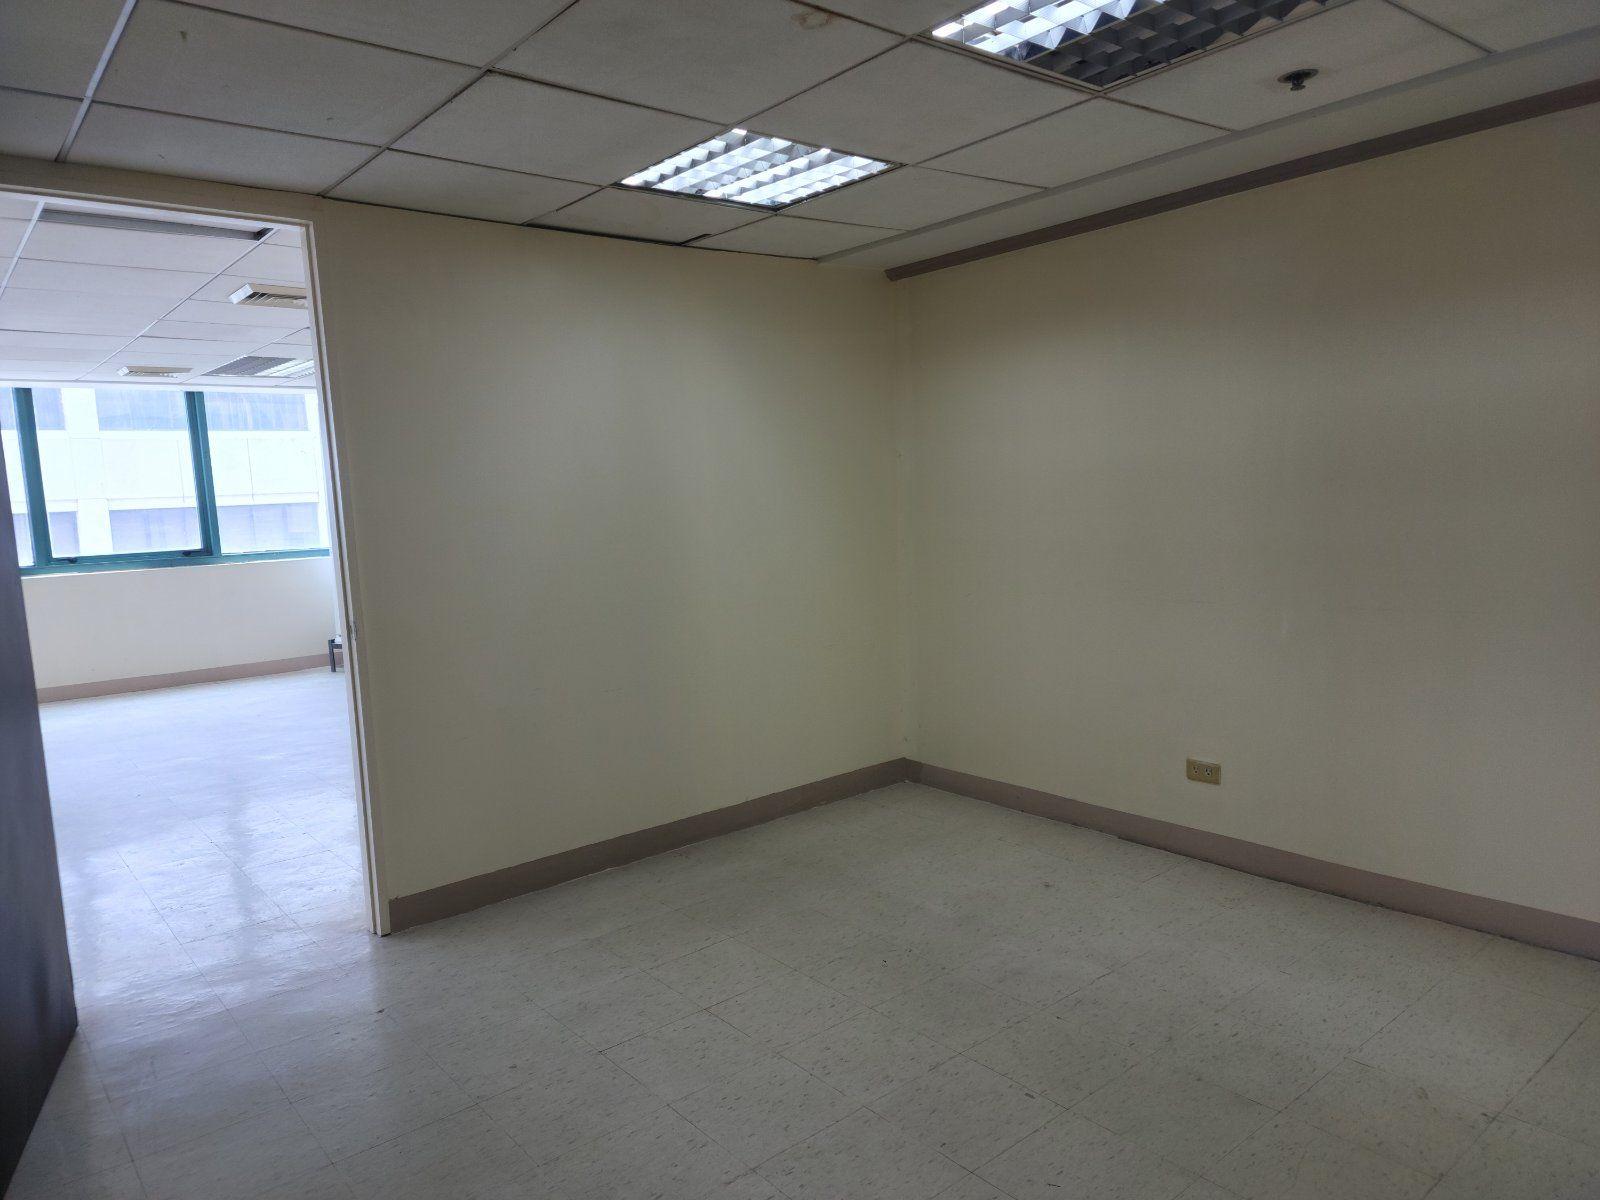 100 sqm Office Space Lease Rent Alabang Muntinlupa Philippines